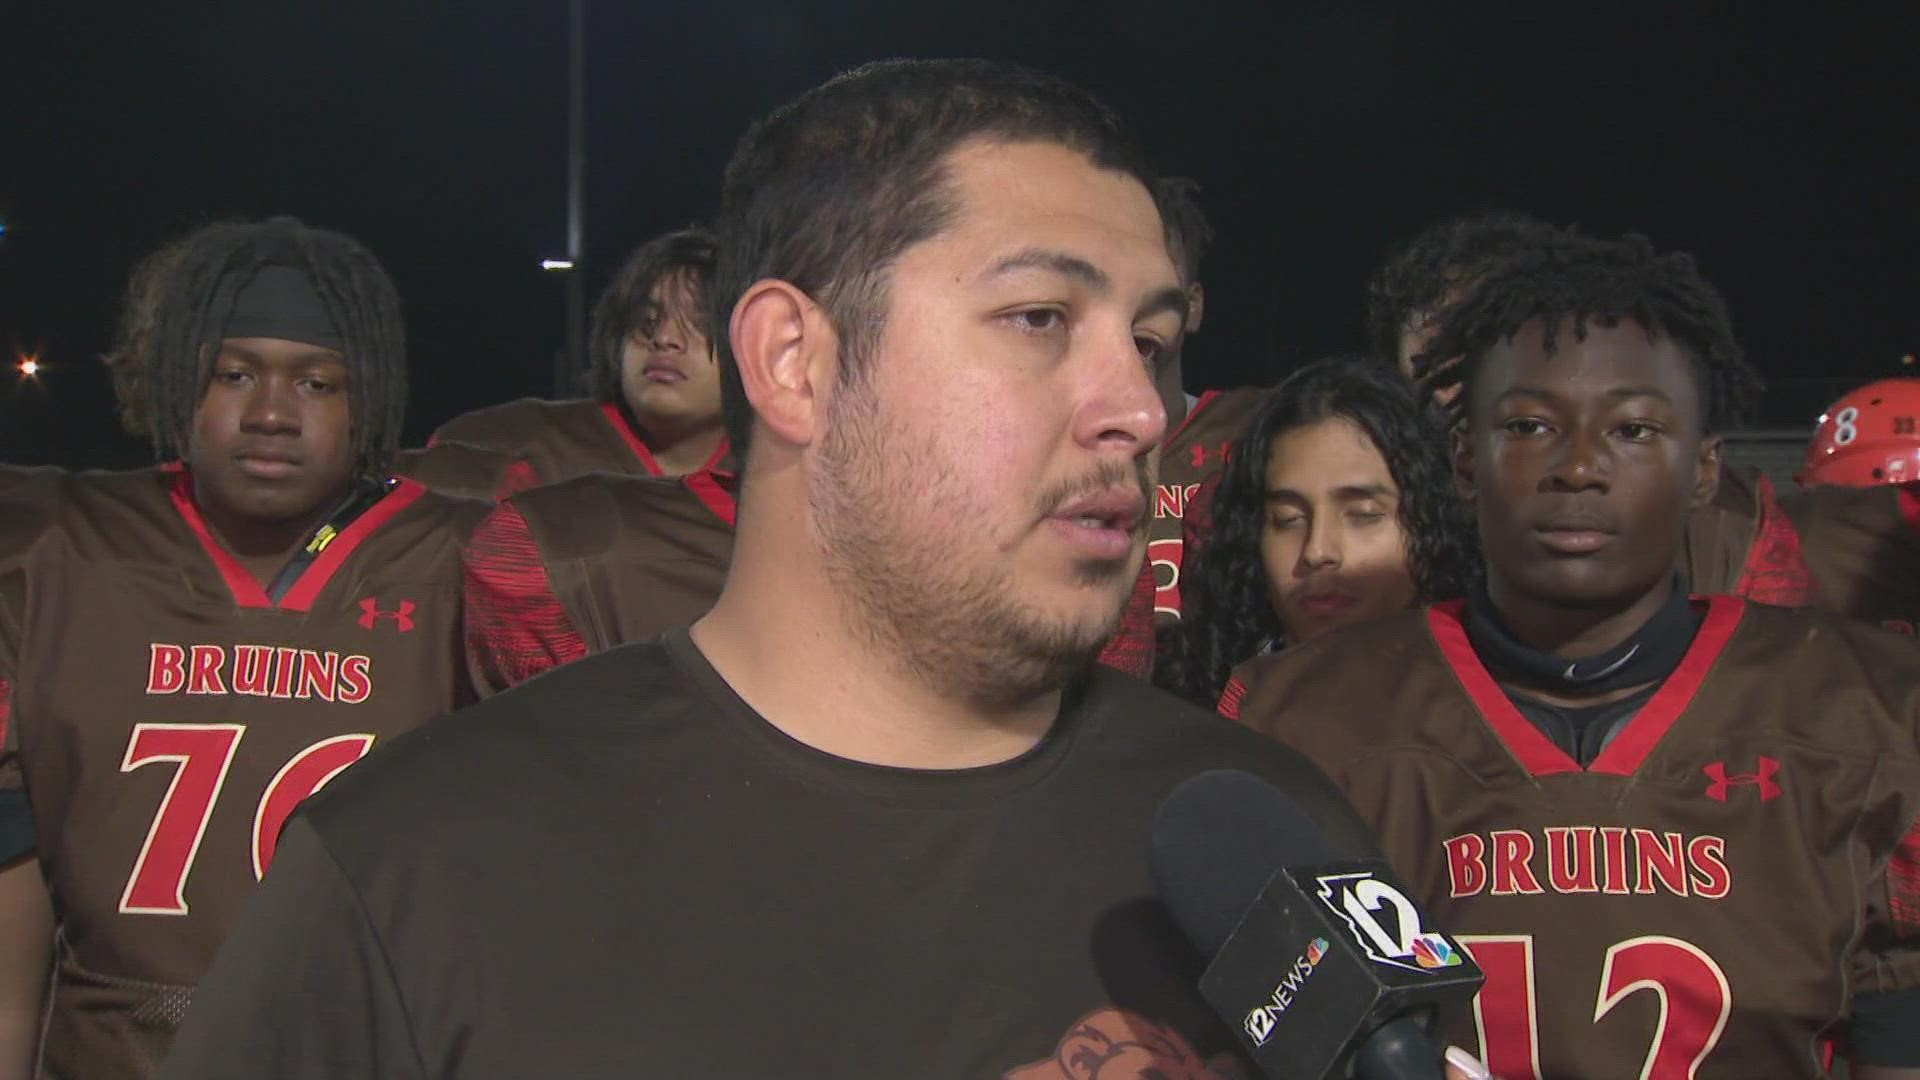 Trevor Browne head coach talks about his team following their Friday night matchup.